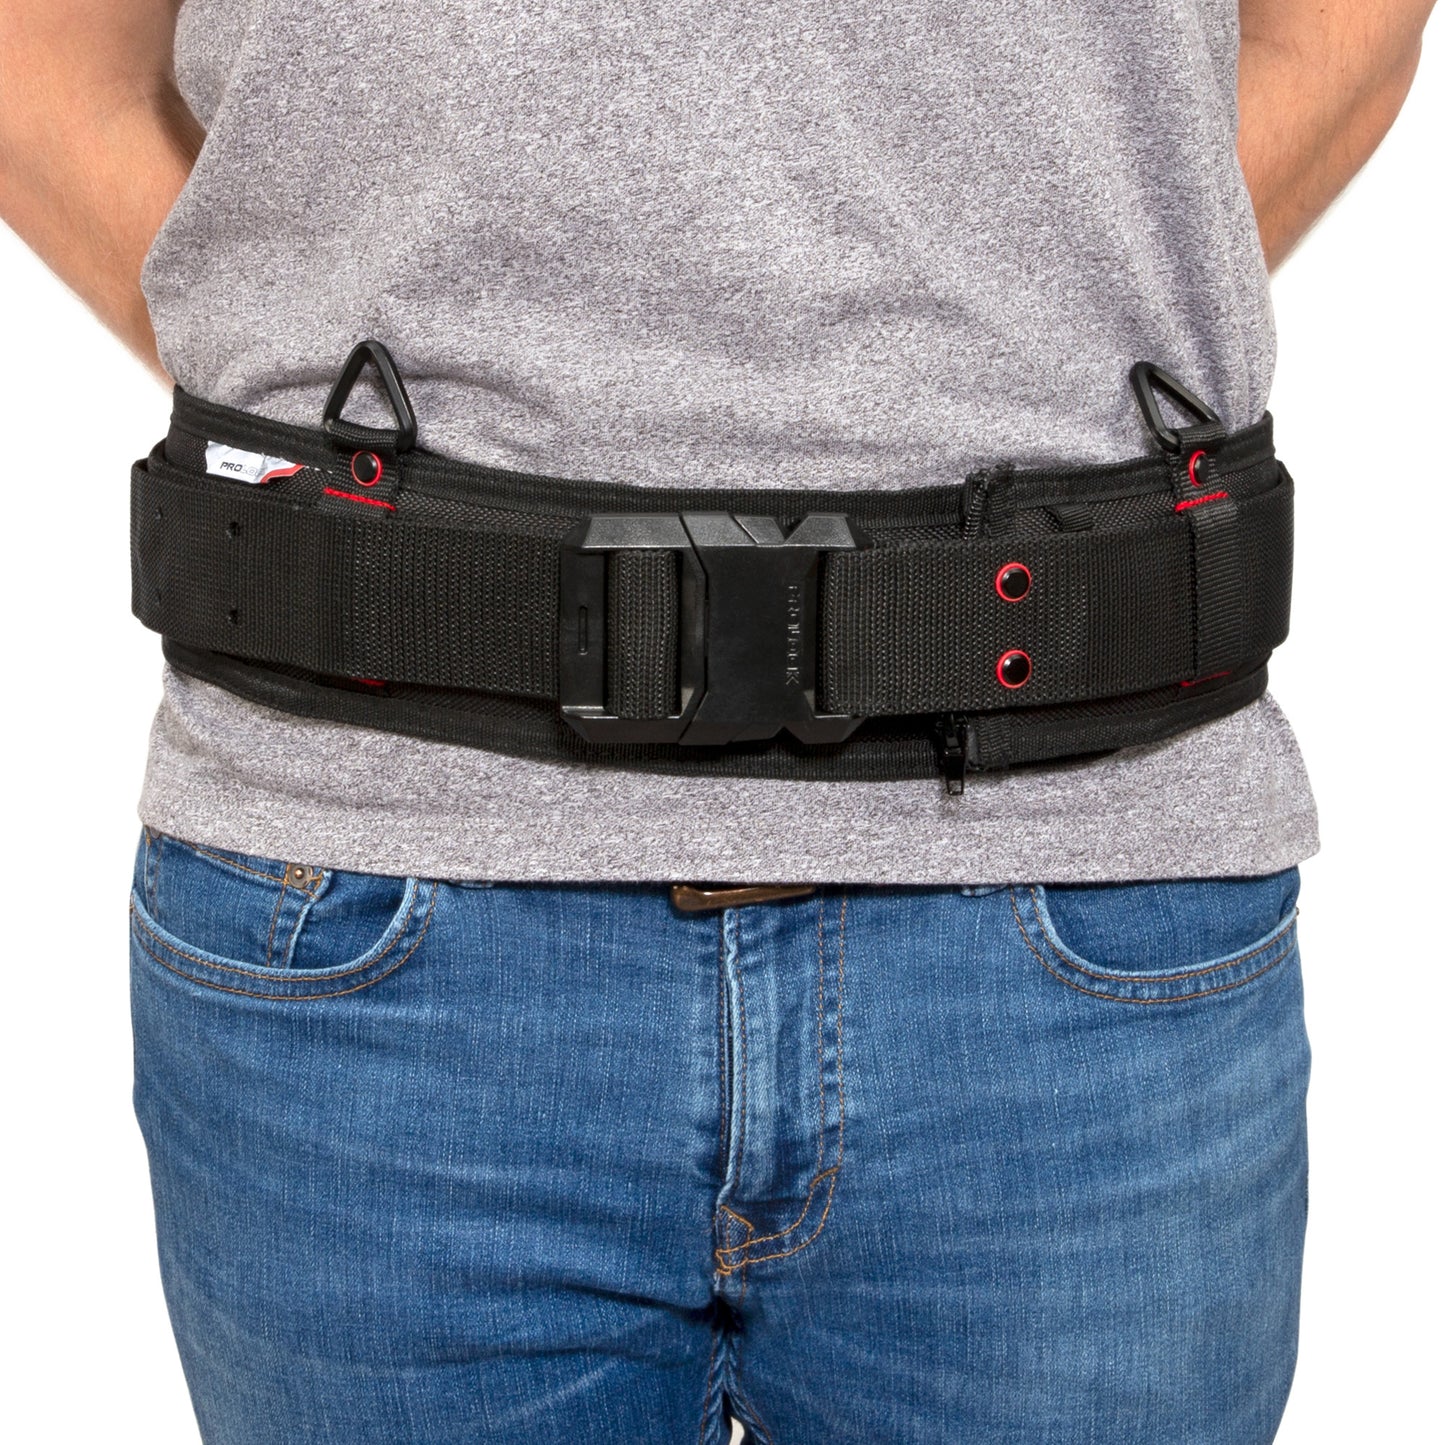 Prolock Padded Sling Belt With Quick-Release Buckle – Steelman Tools